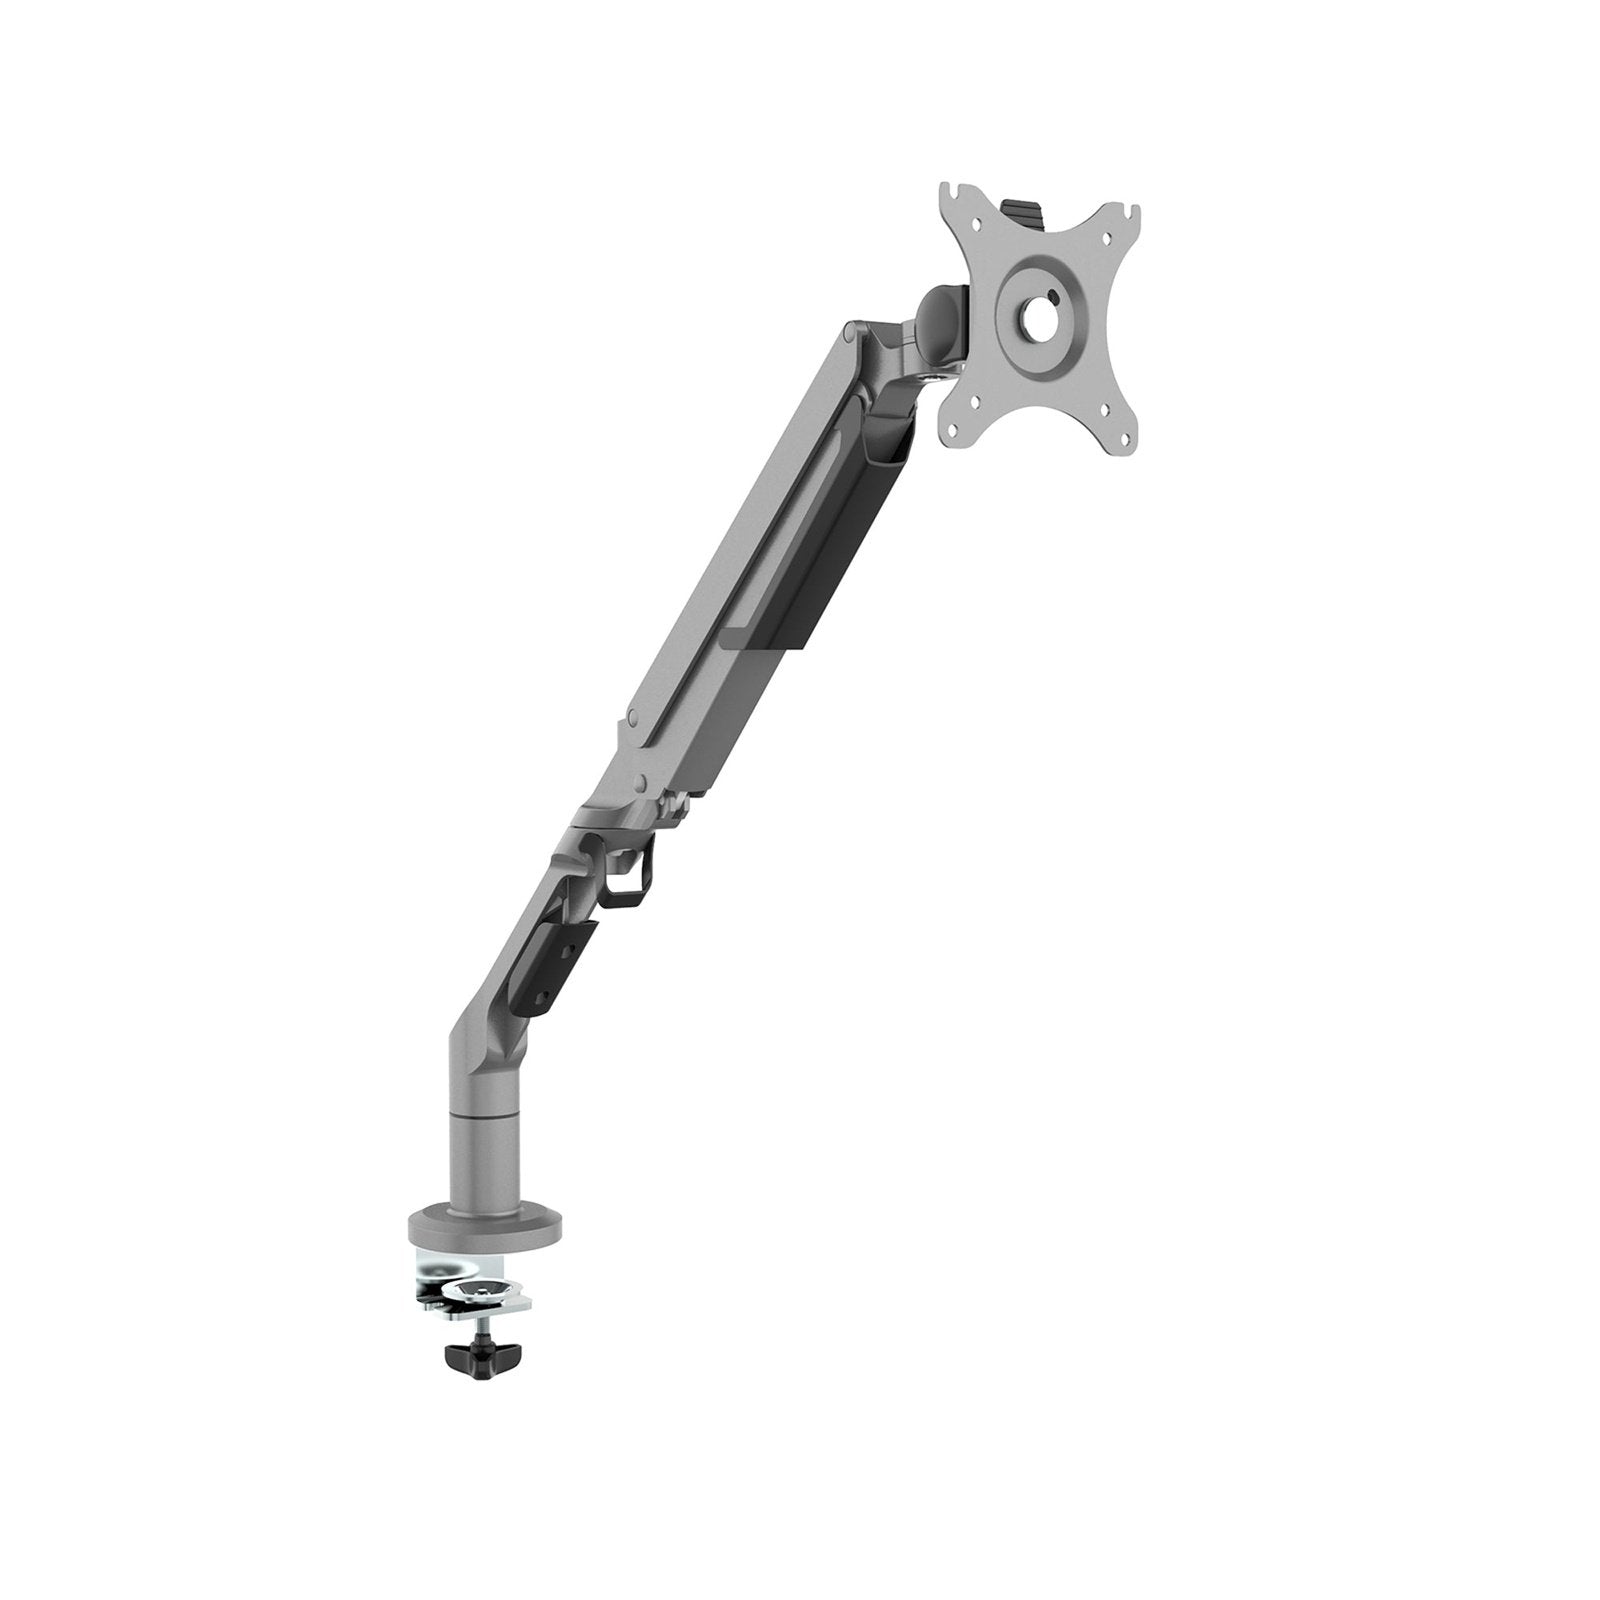 Triton gas lift single monitor arm - Office Products Online